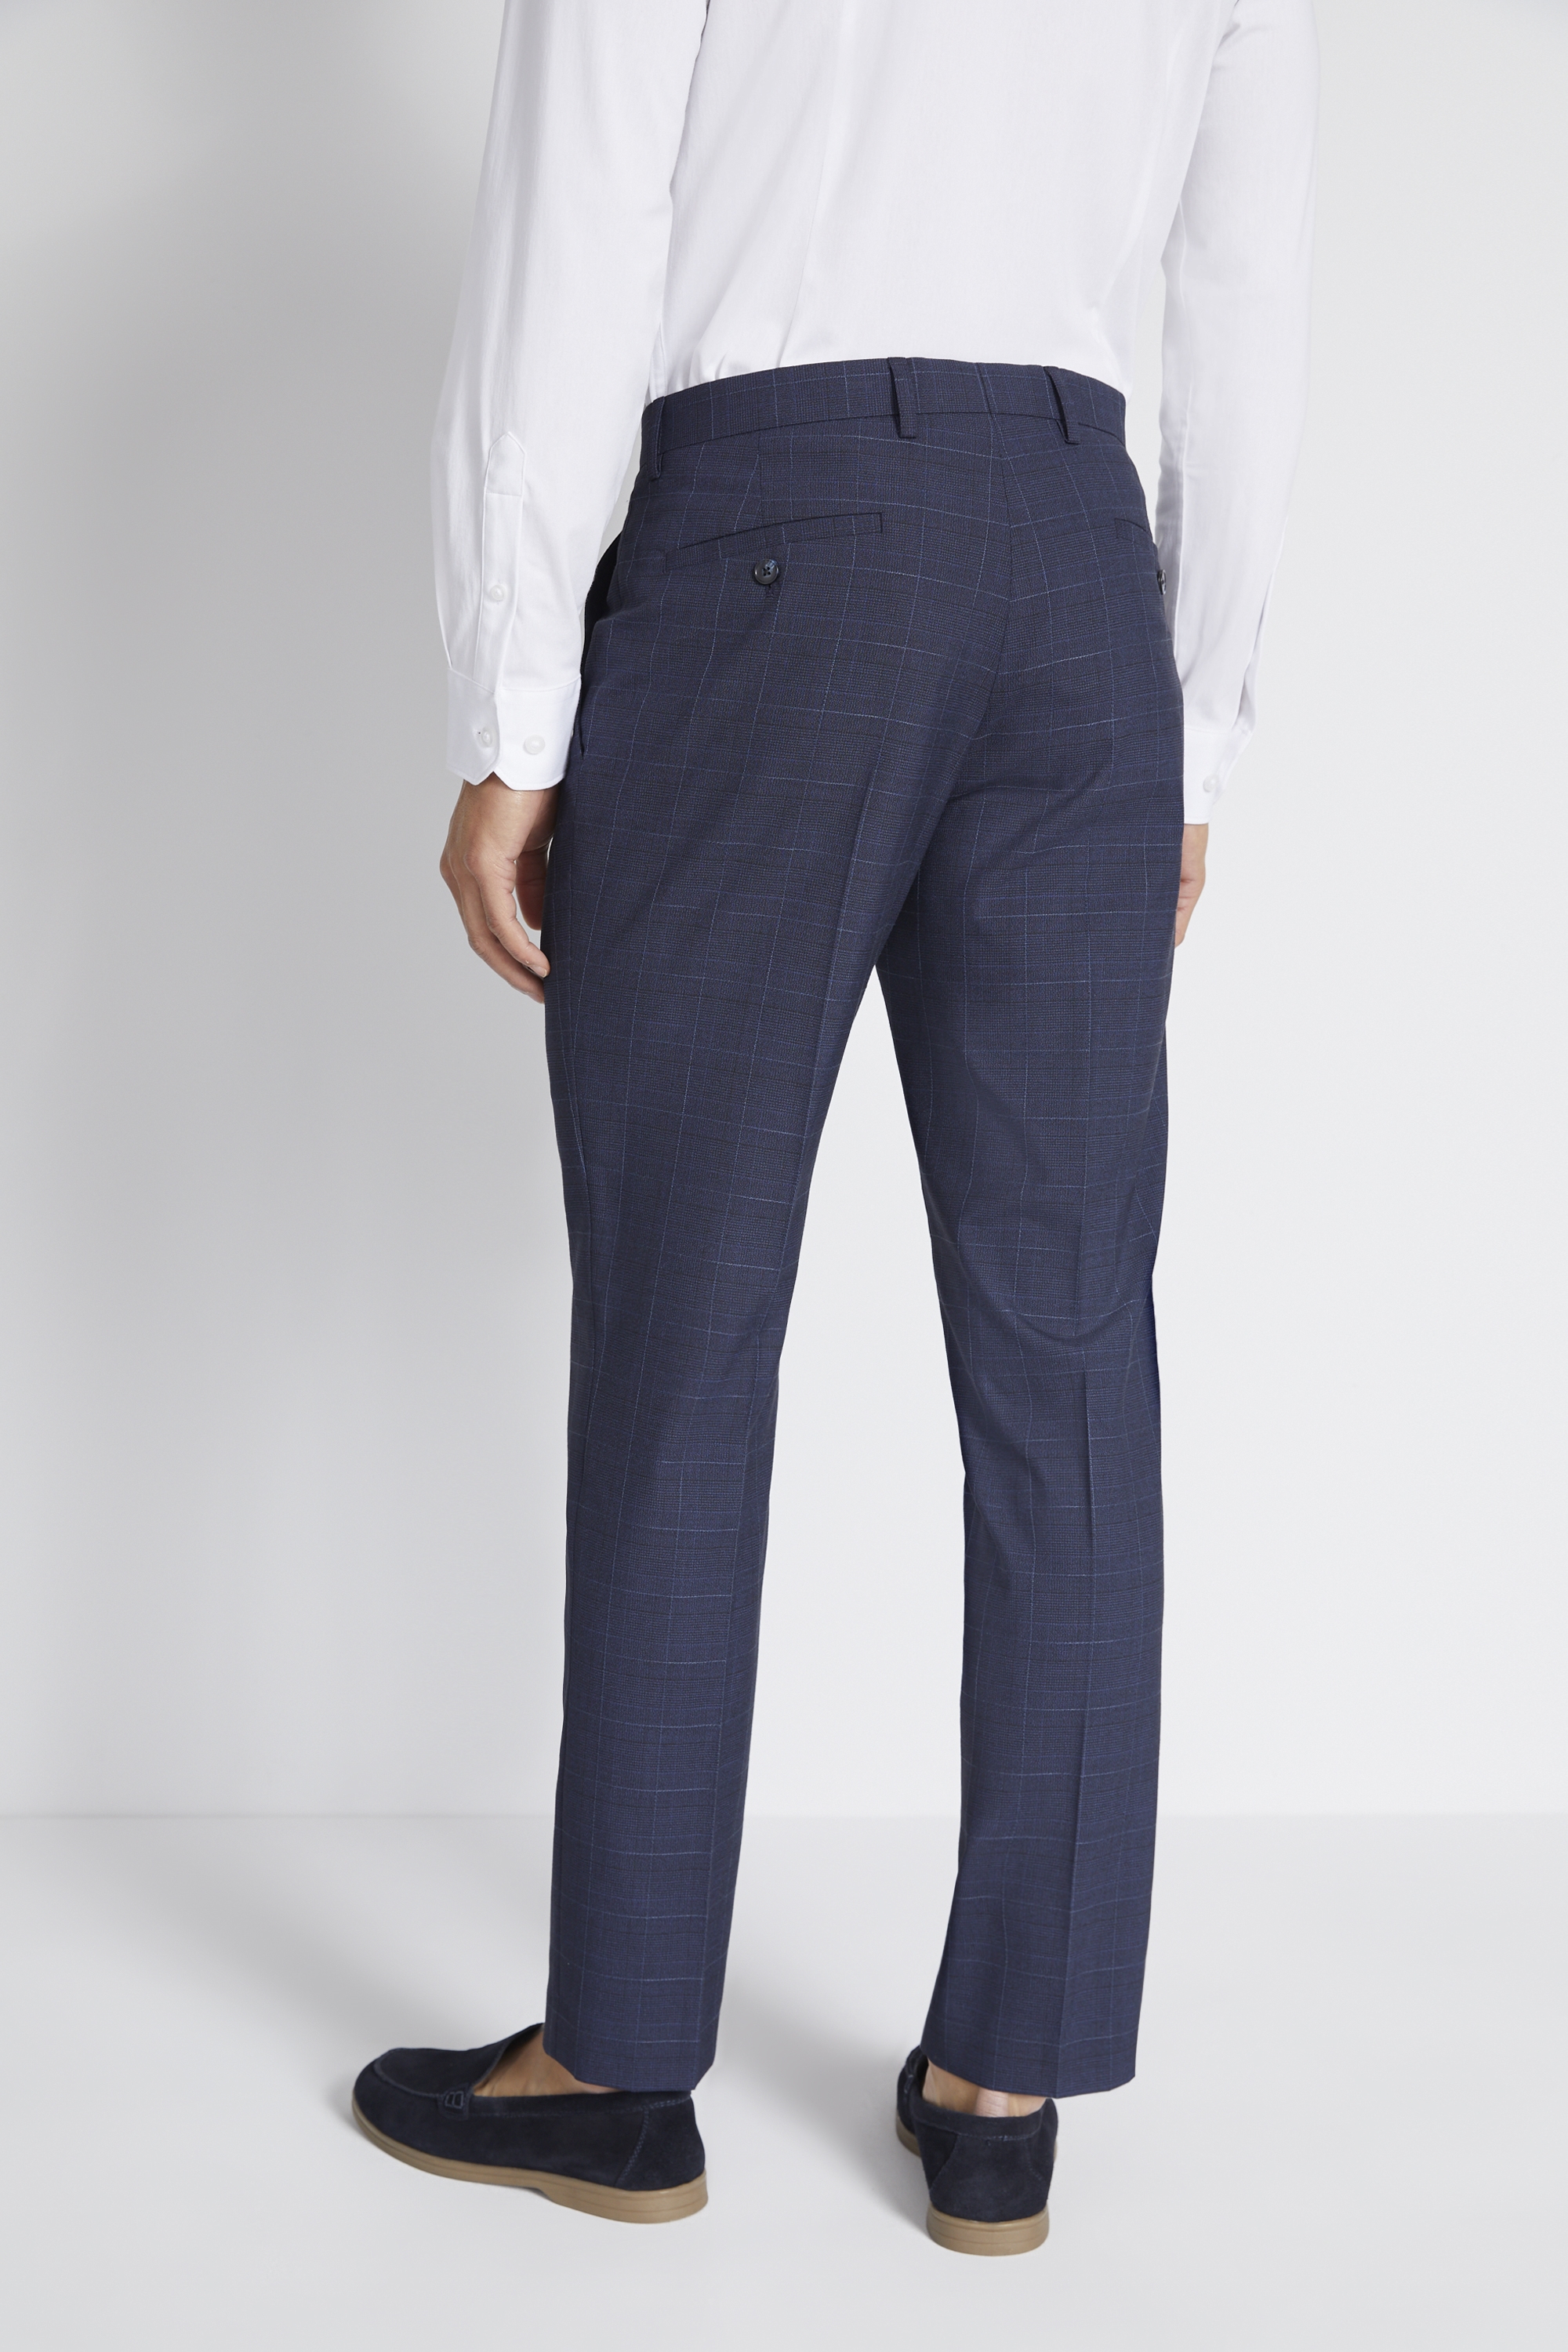 Slim Fit Blue Boucle Check Trouser | Buy Online at Moss